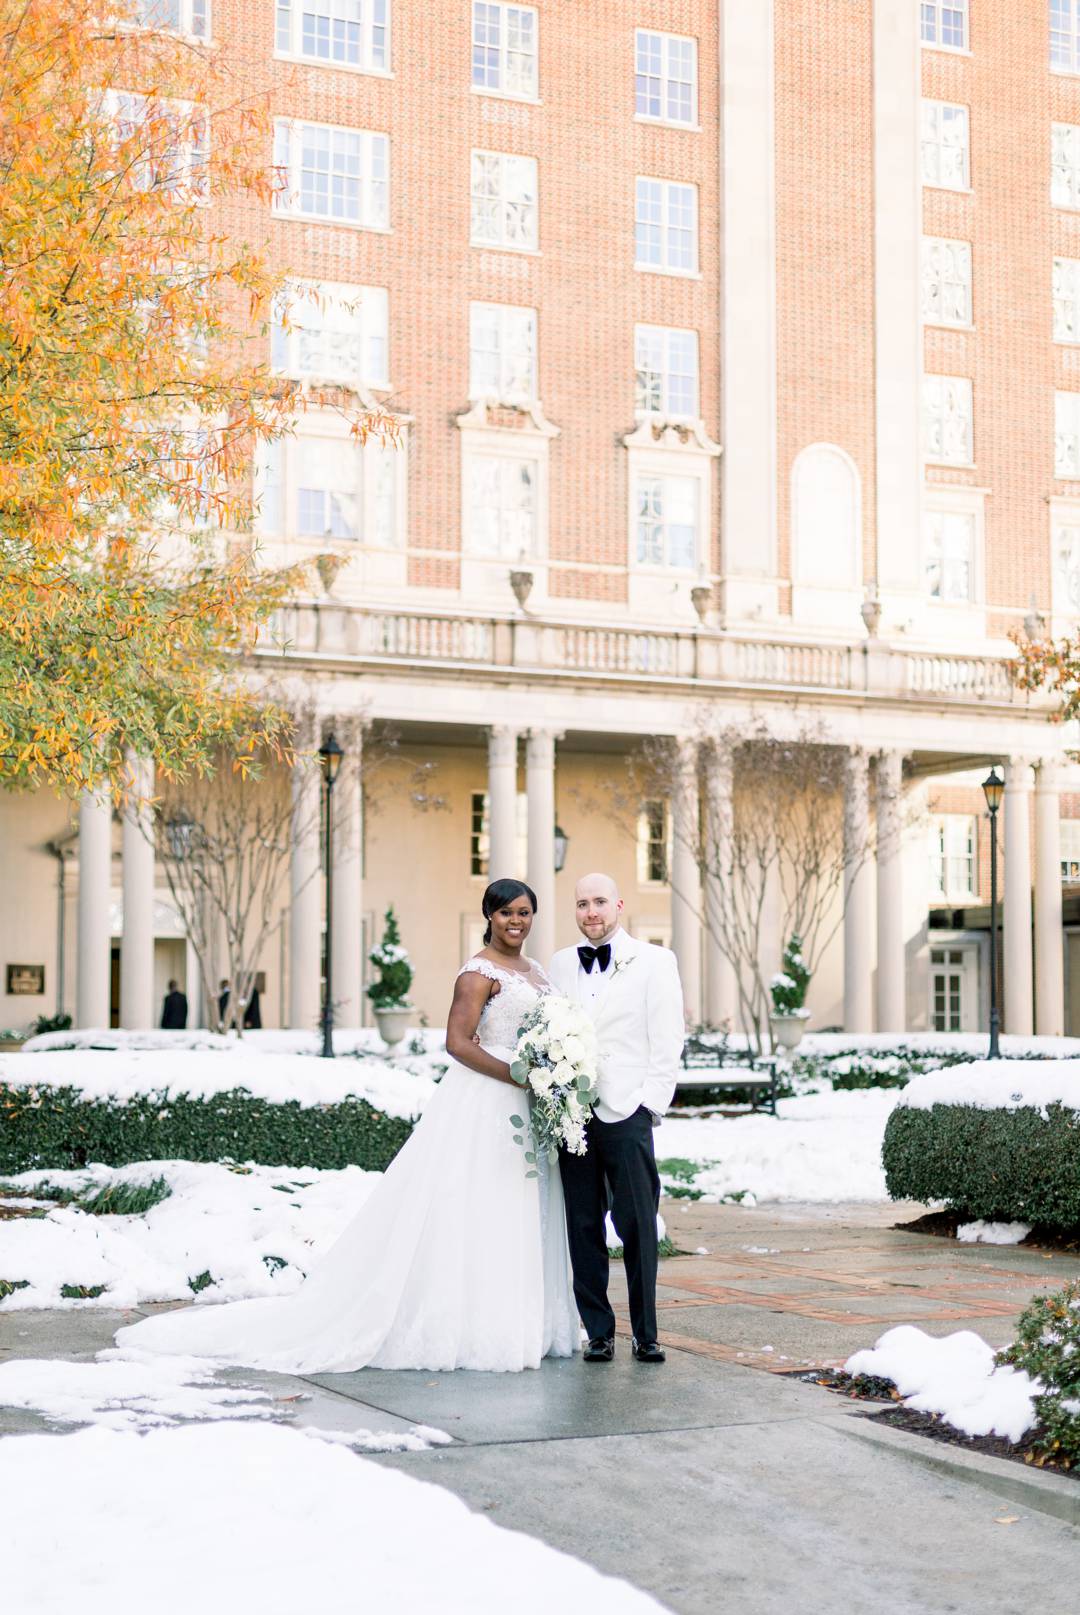 Bride and Groom's Winter Wonderland Wedding at the Biltmore Ballrooms in Atlanta, GA by Leigh Wolfe Photography